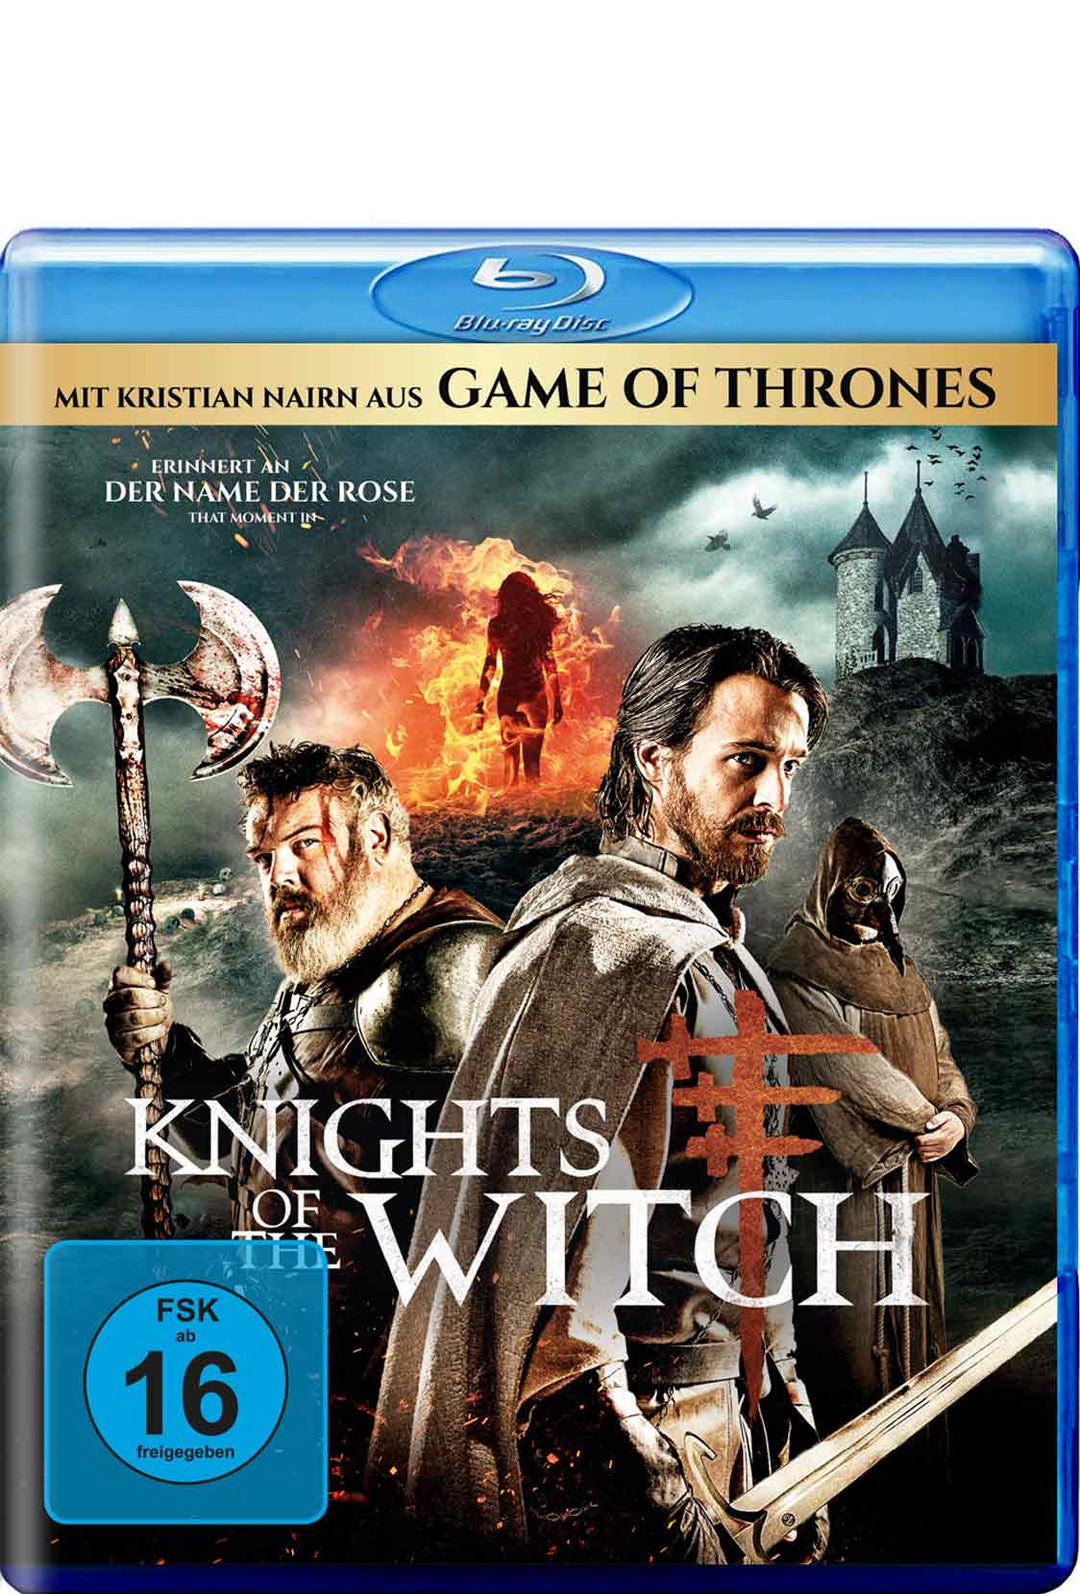 Knights of the Witch (Blu-ray Softbox)